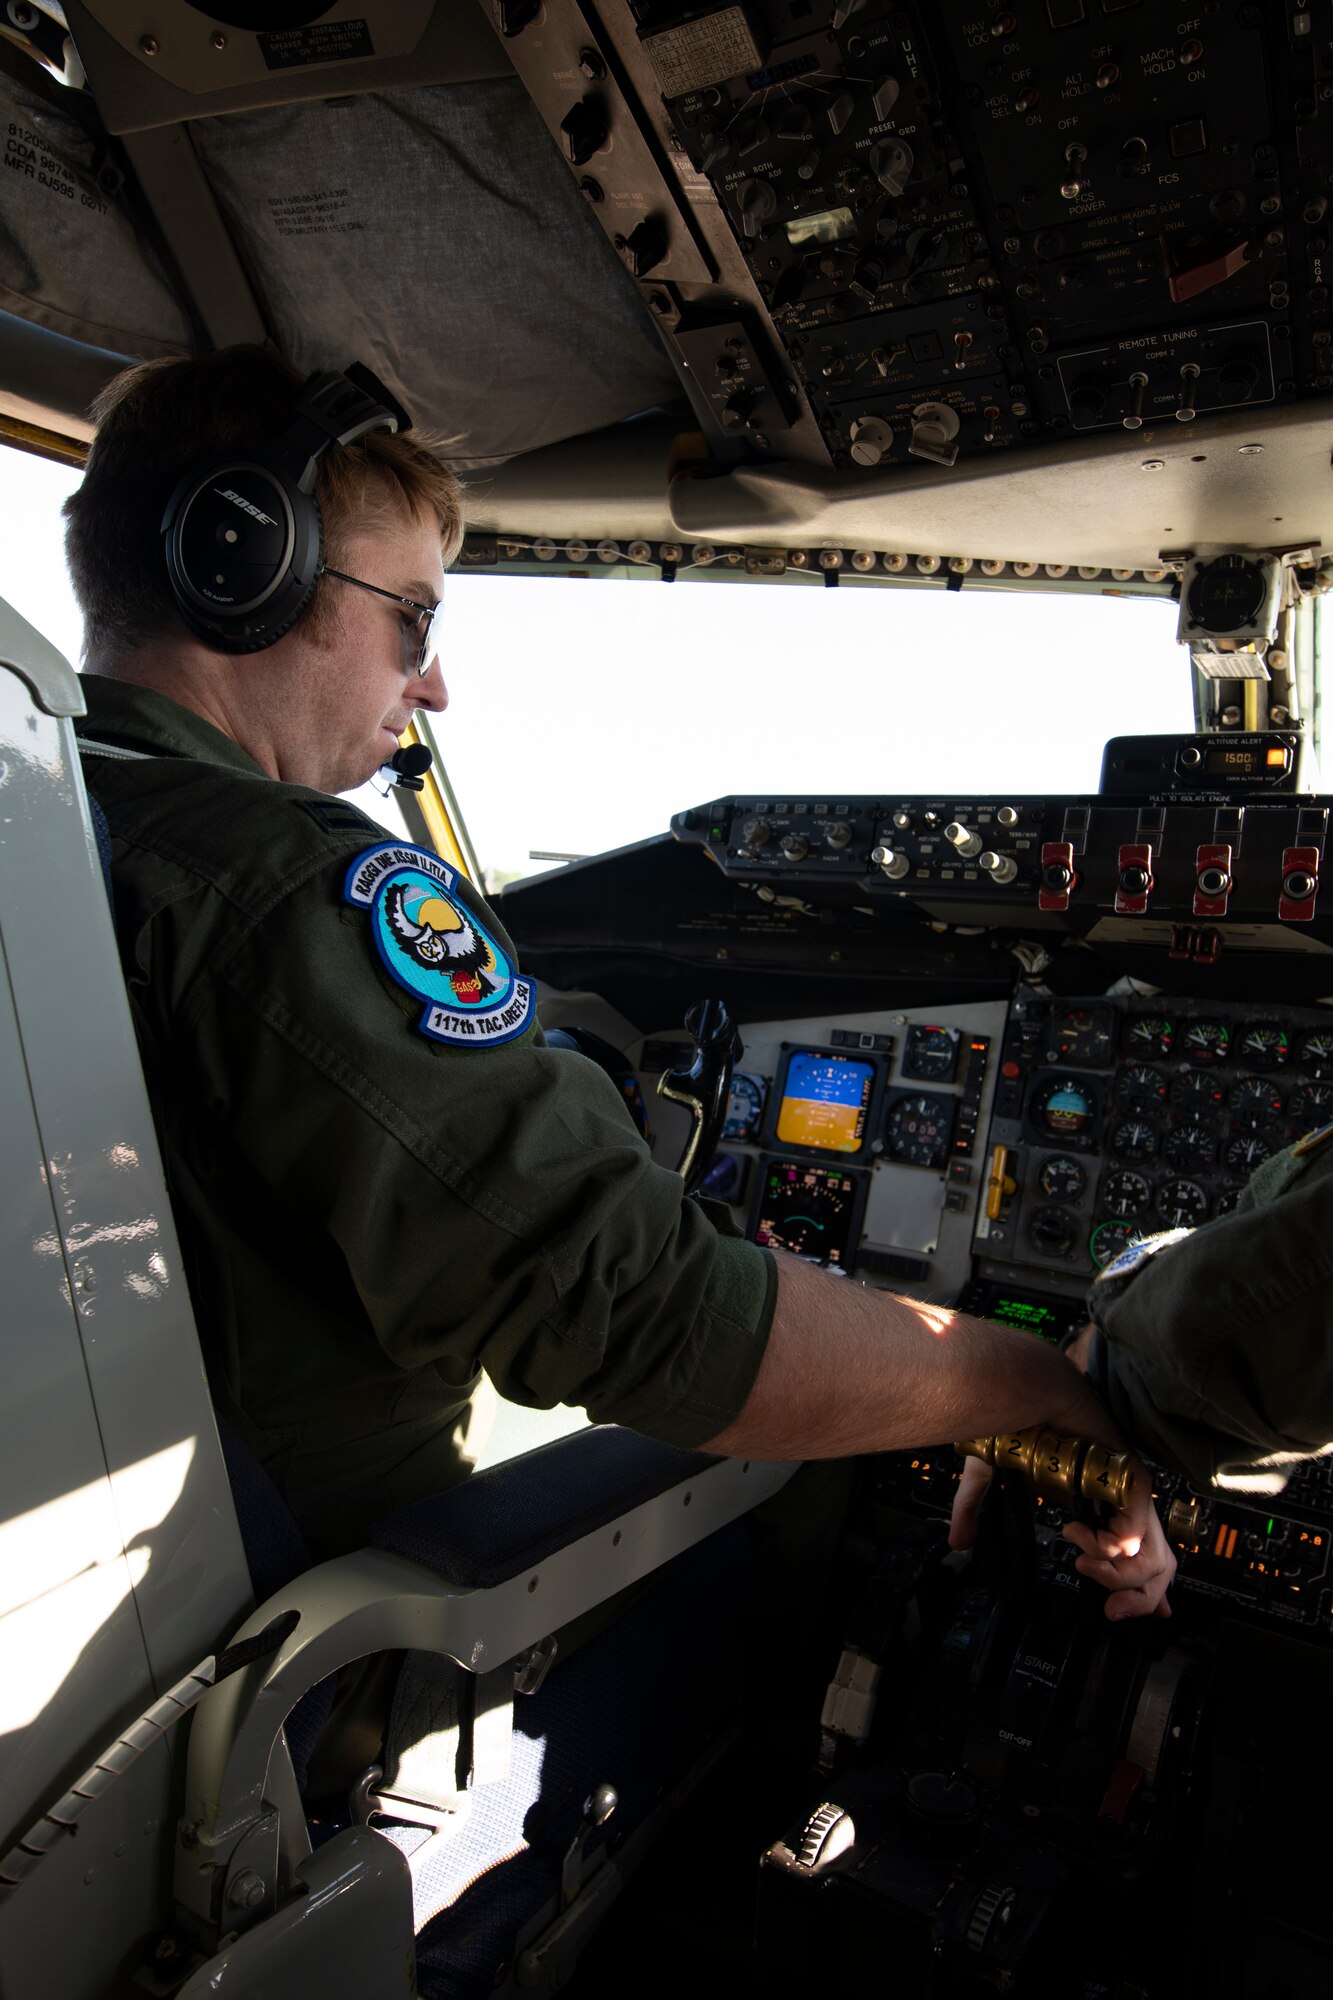 U.S. Air Force Capt. Shane Dunn, a KC-135 Stratotanker pilot with the 190th Air Refueling Wing, Kansas Air National Guard, prepares to taxi May 11, 2022, at Hunter Army Airfield, Georgia. Three air refueling units from across the Air National Guard provided in-flight refueling in support of Sentry Savannah 2022, the ANG’s premier counter air exercise which encompasses 10 units of fourth and fifth generation fighter aircraft, tests the capabilities of our warfighters in a simulated near-peer environment and trains the next generation of fighter pilots for tomorrow’s fight. (U.S. Air National Guard photo by Staff Sgt. Hanna Smith)